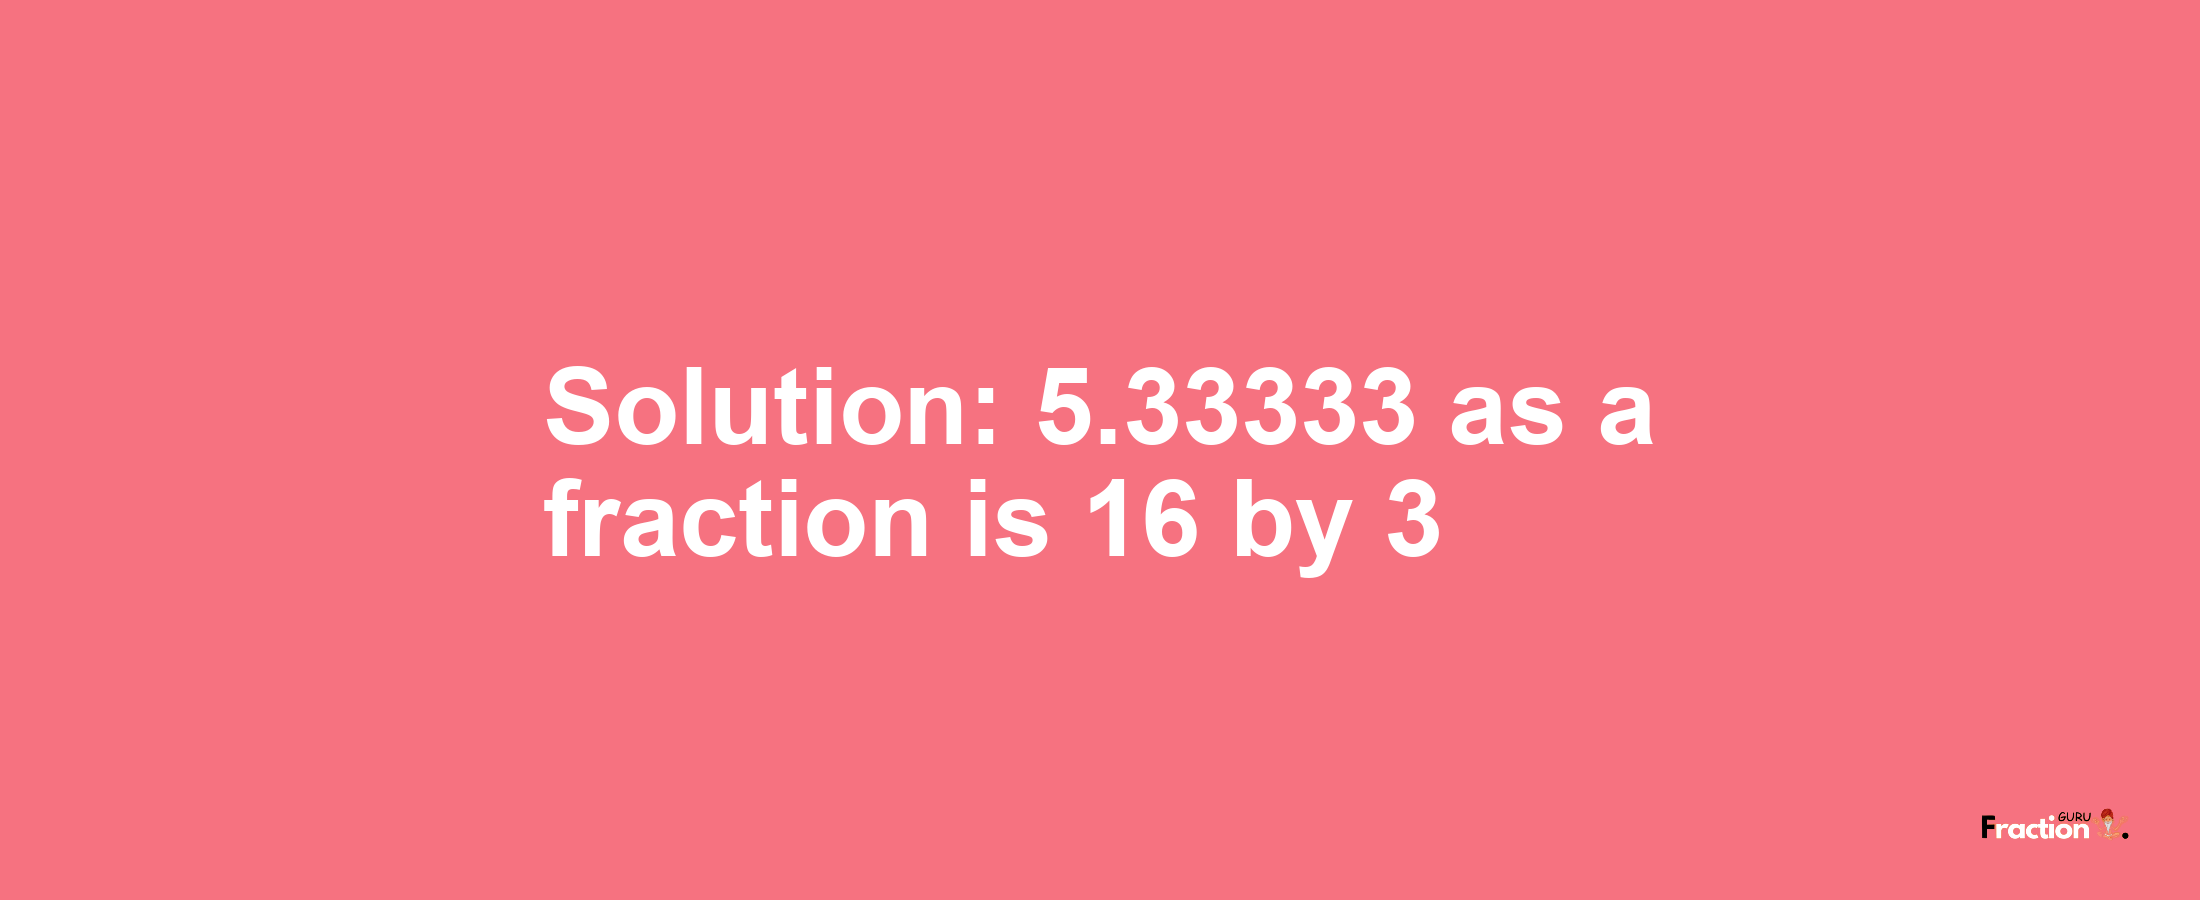 Solution:5.33333 as a fraction is 16/3